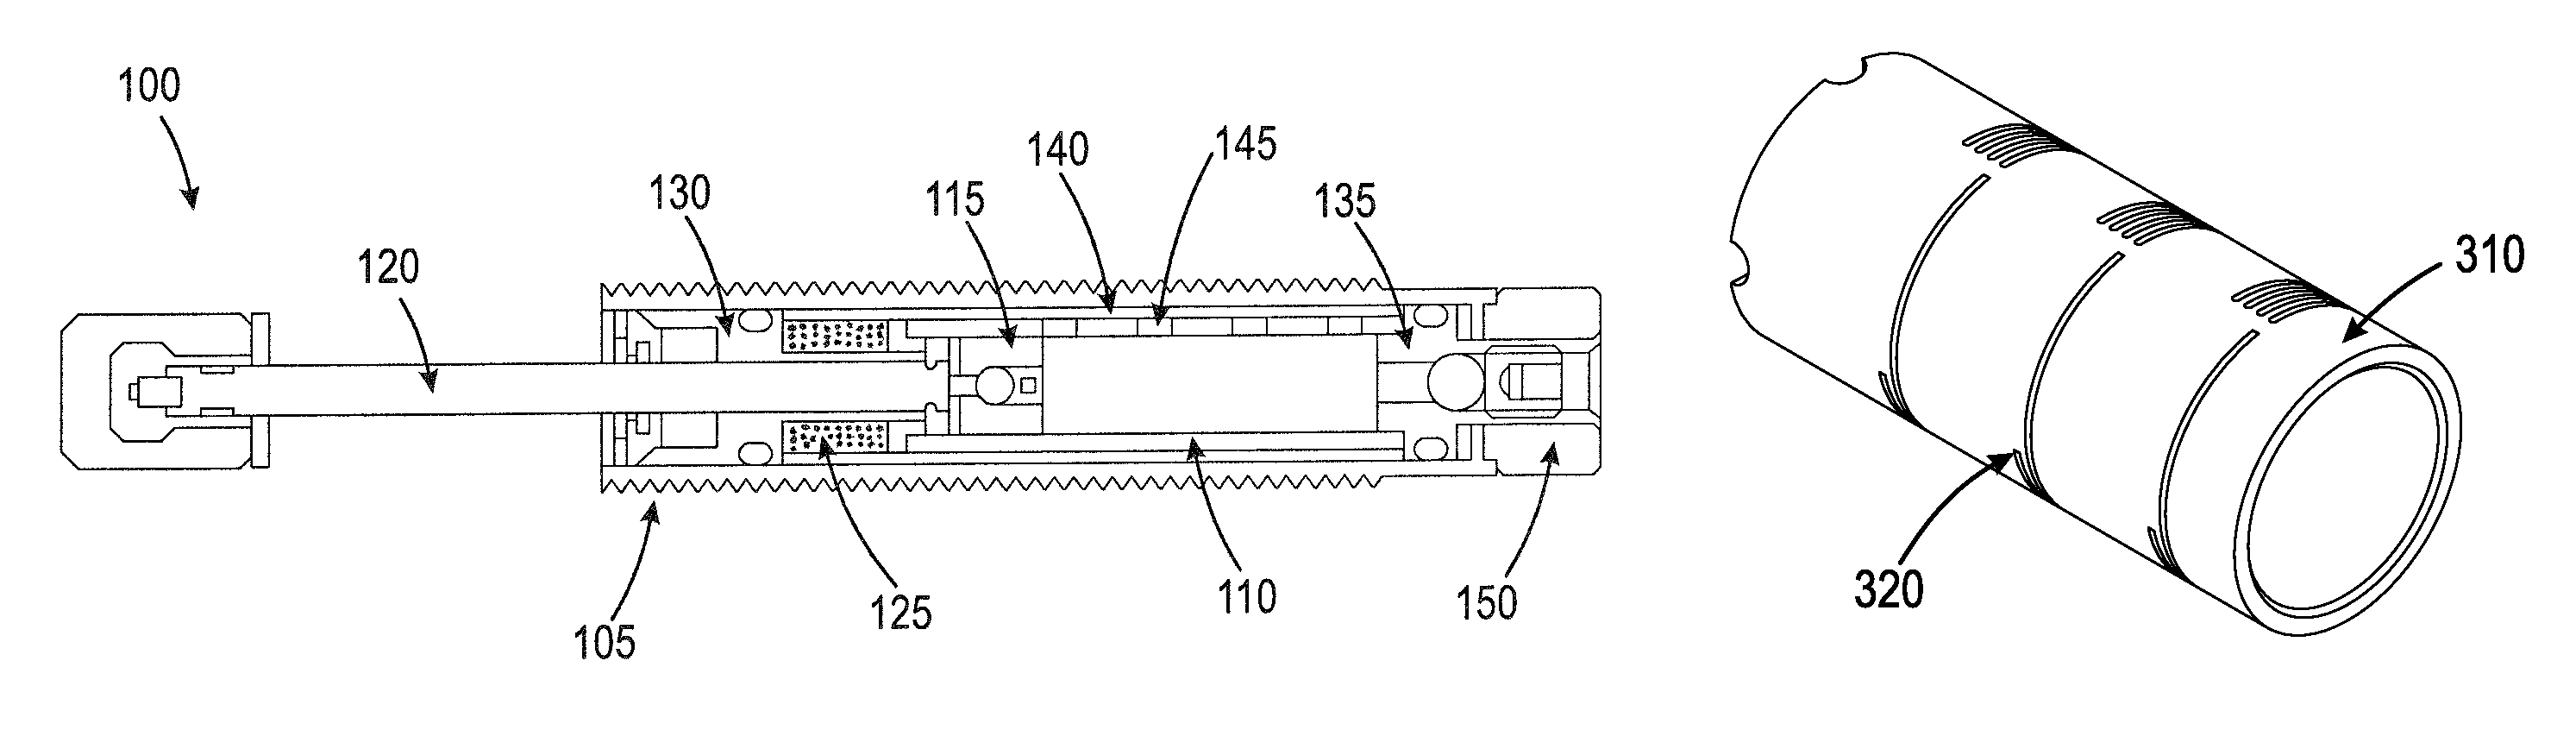 Shock absorber with variable damping profile